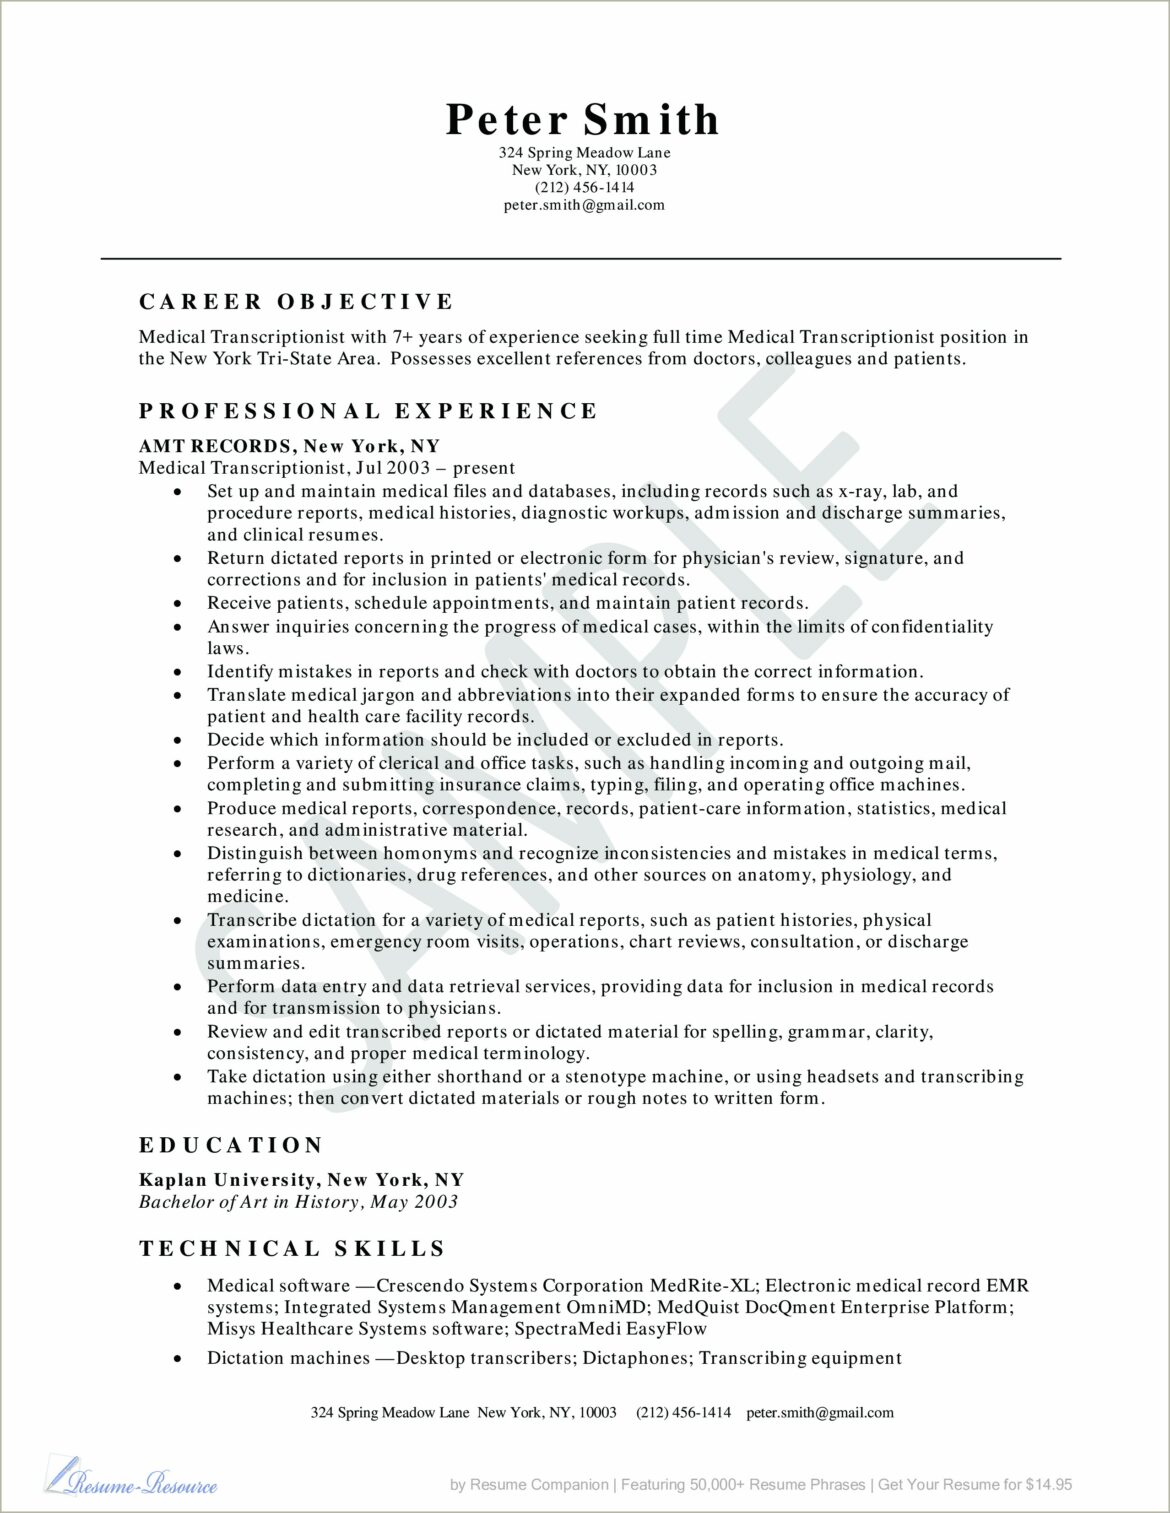 Sample Resume For Medical Transcriptionist Without Experience